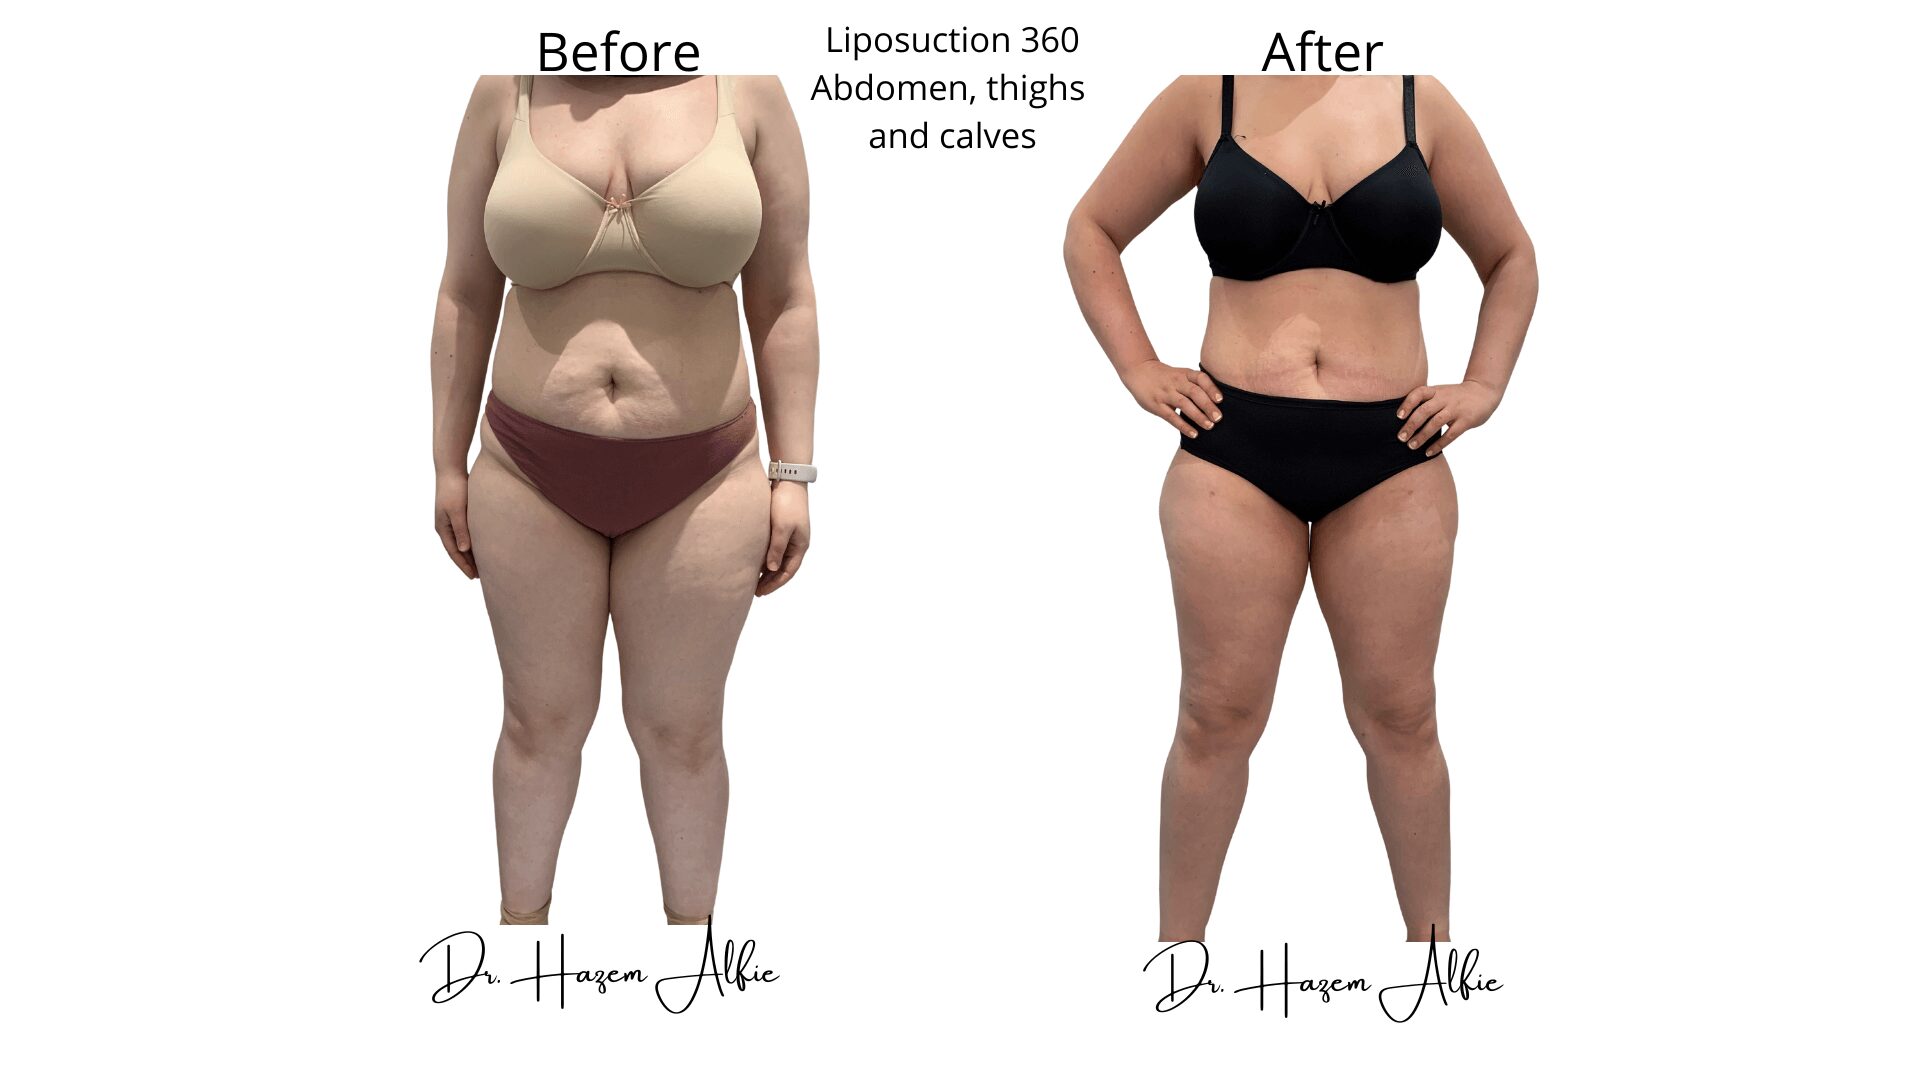 A woman before and after liposuction.